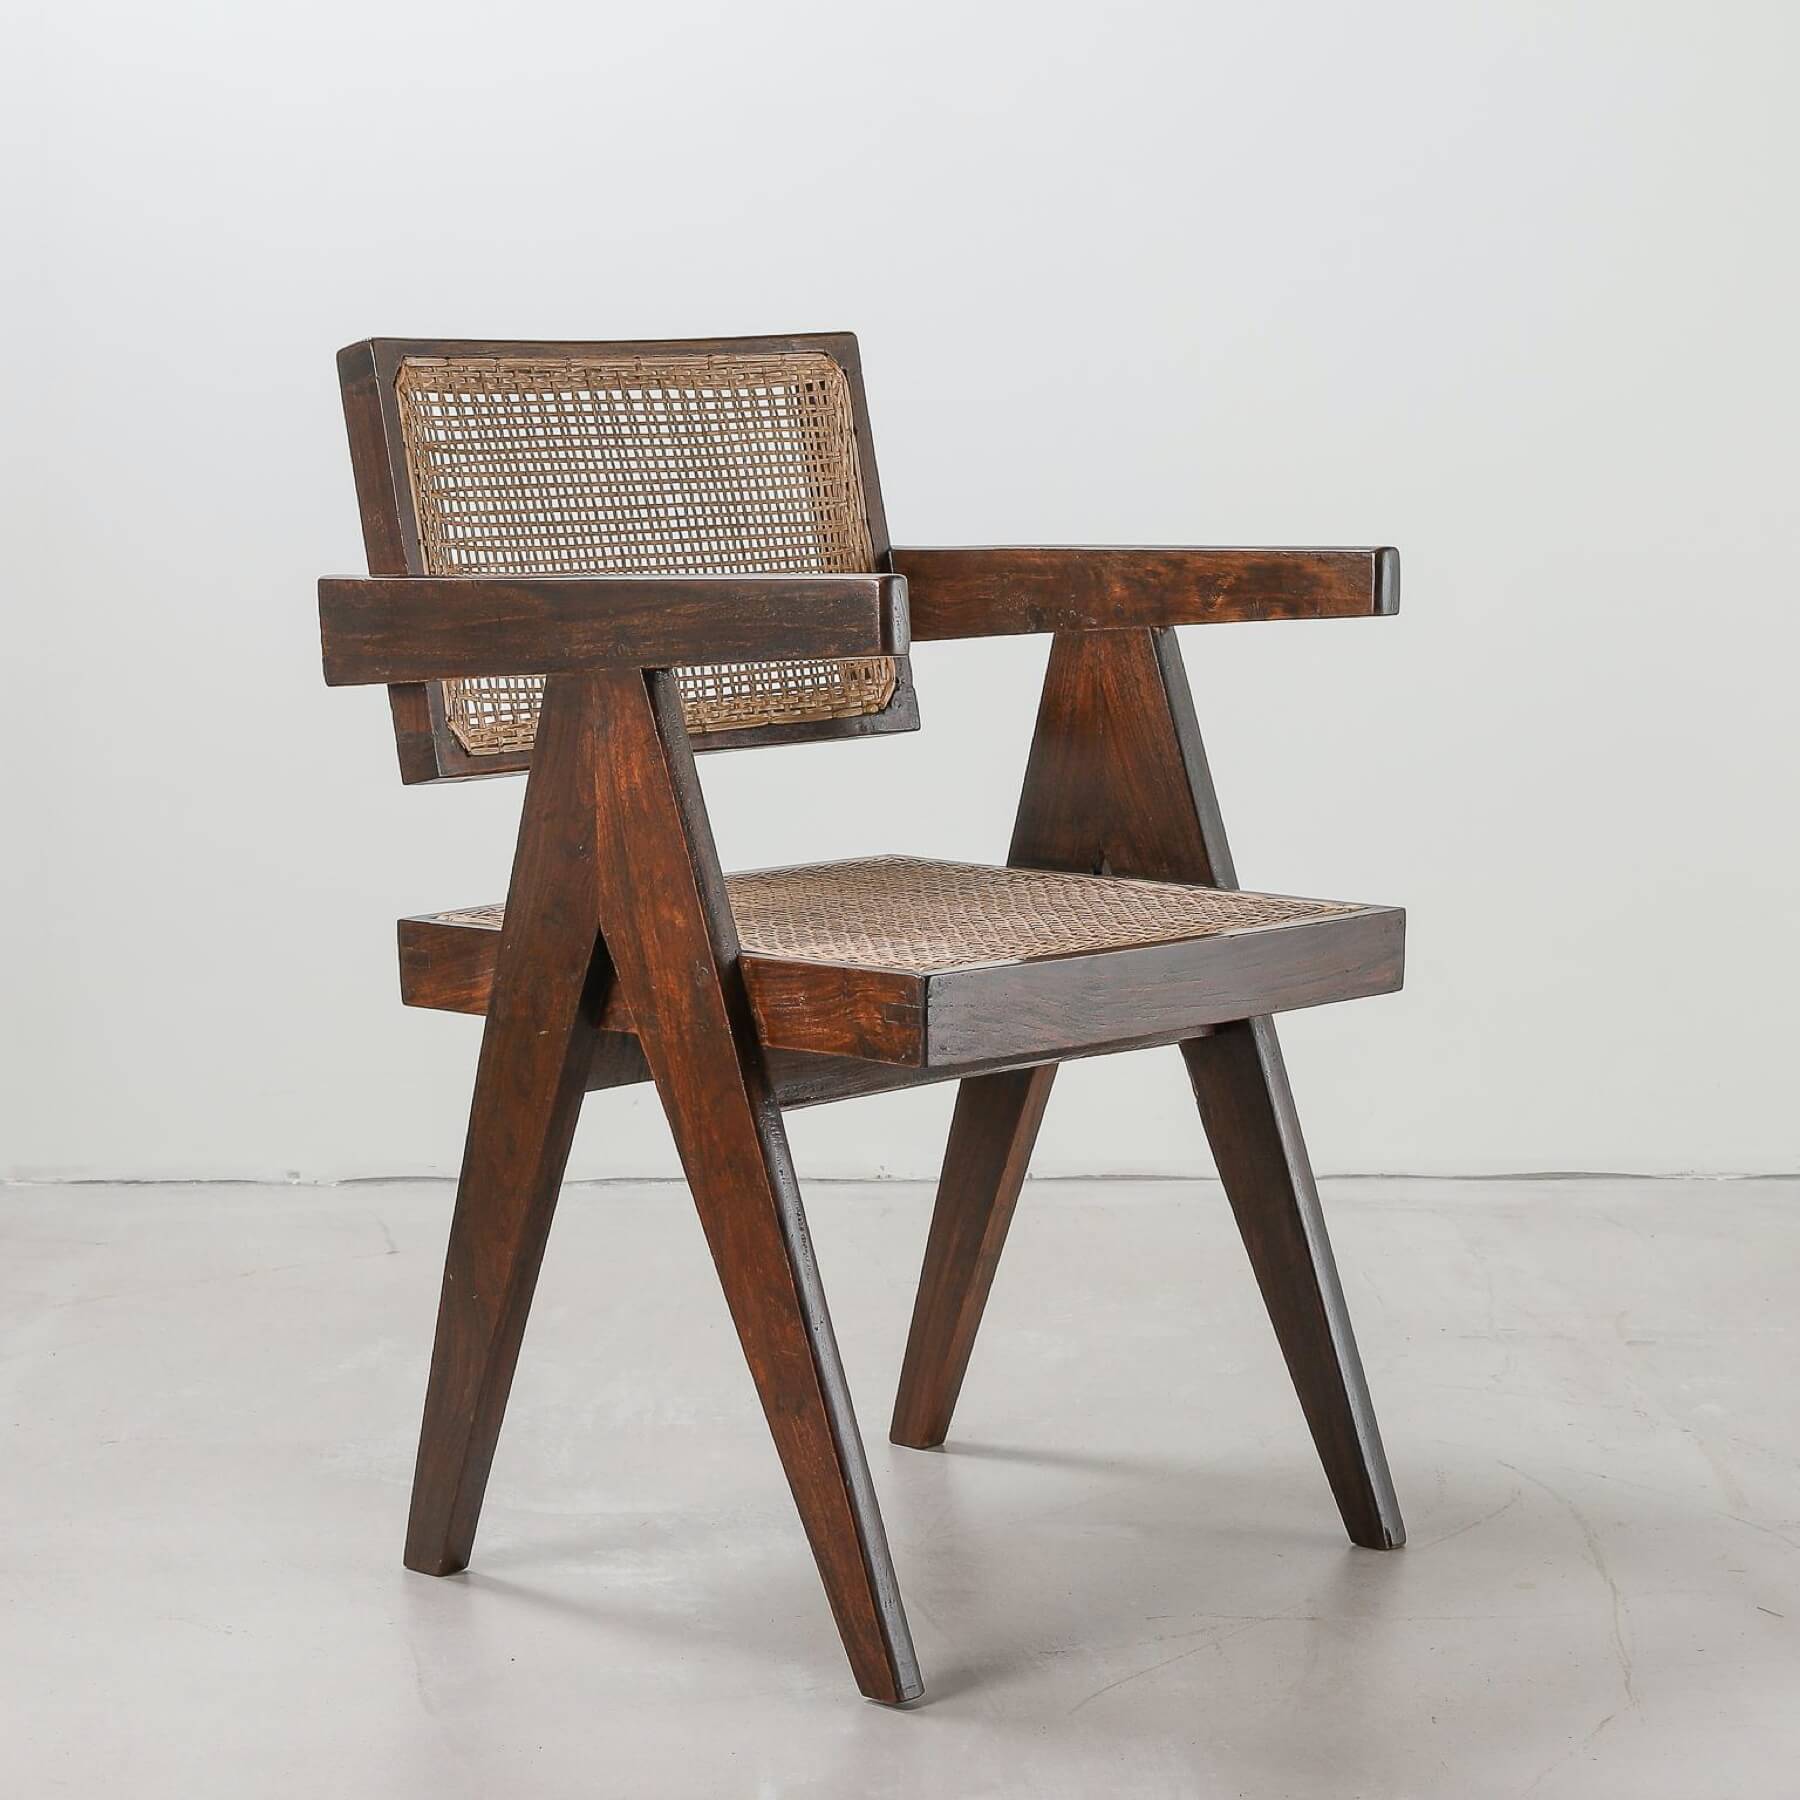 The Chandigarh chair by Pierre Jeanneret